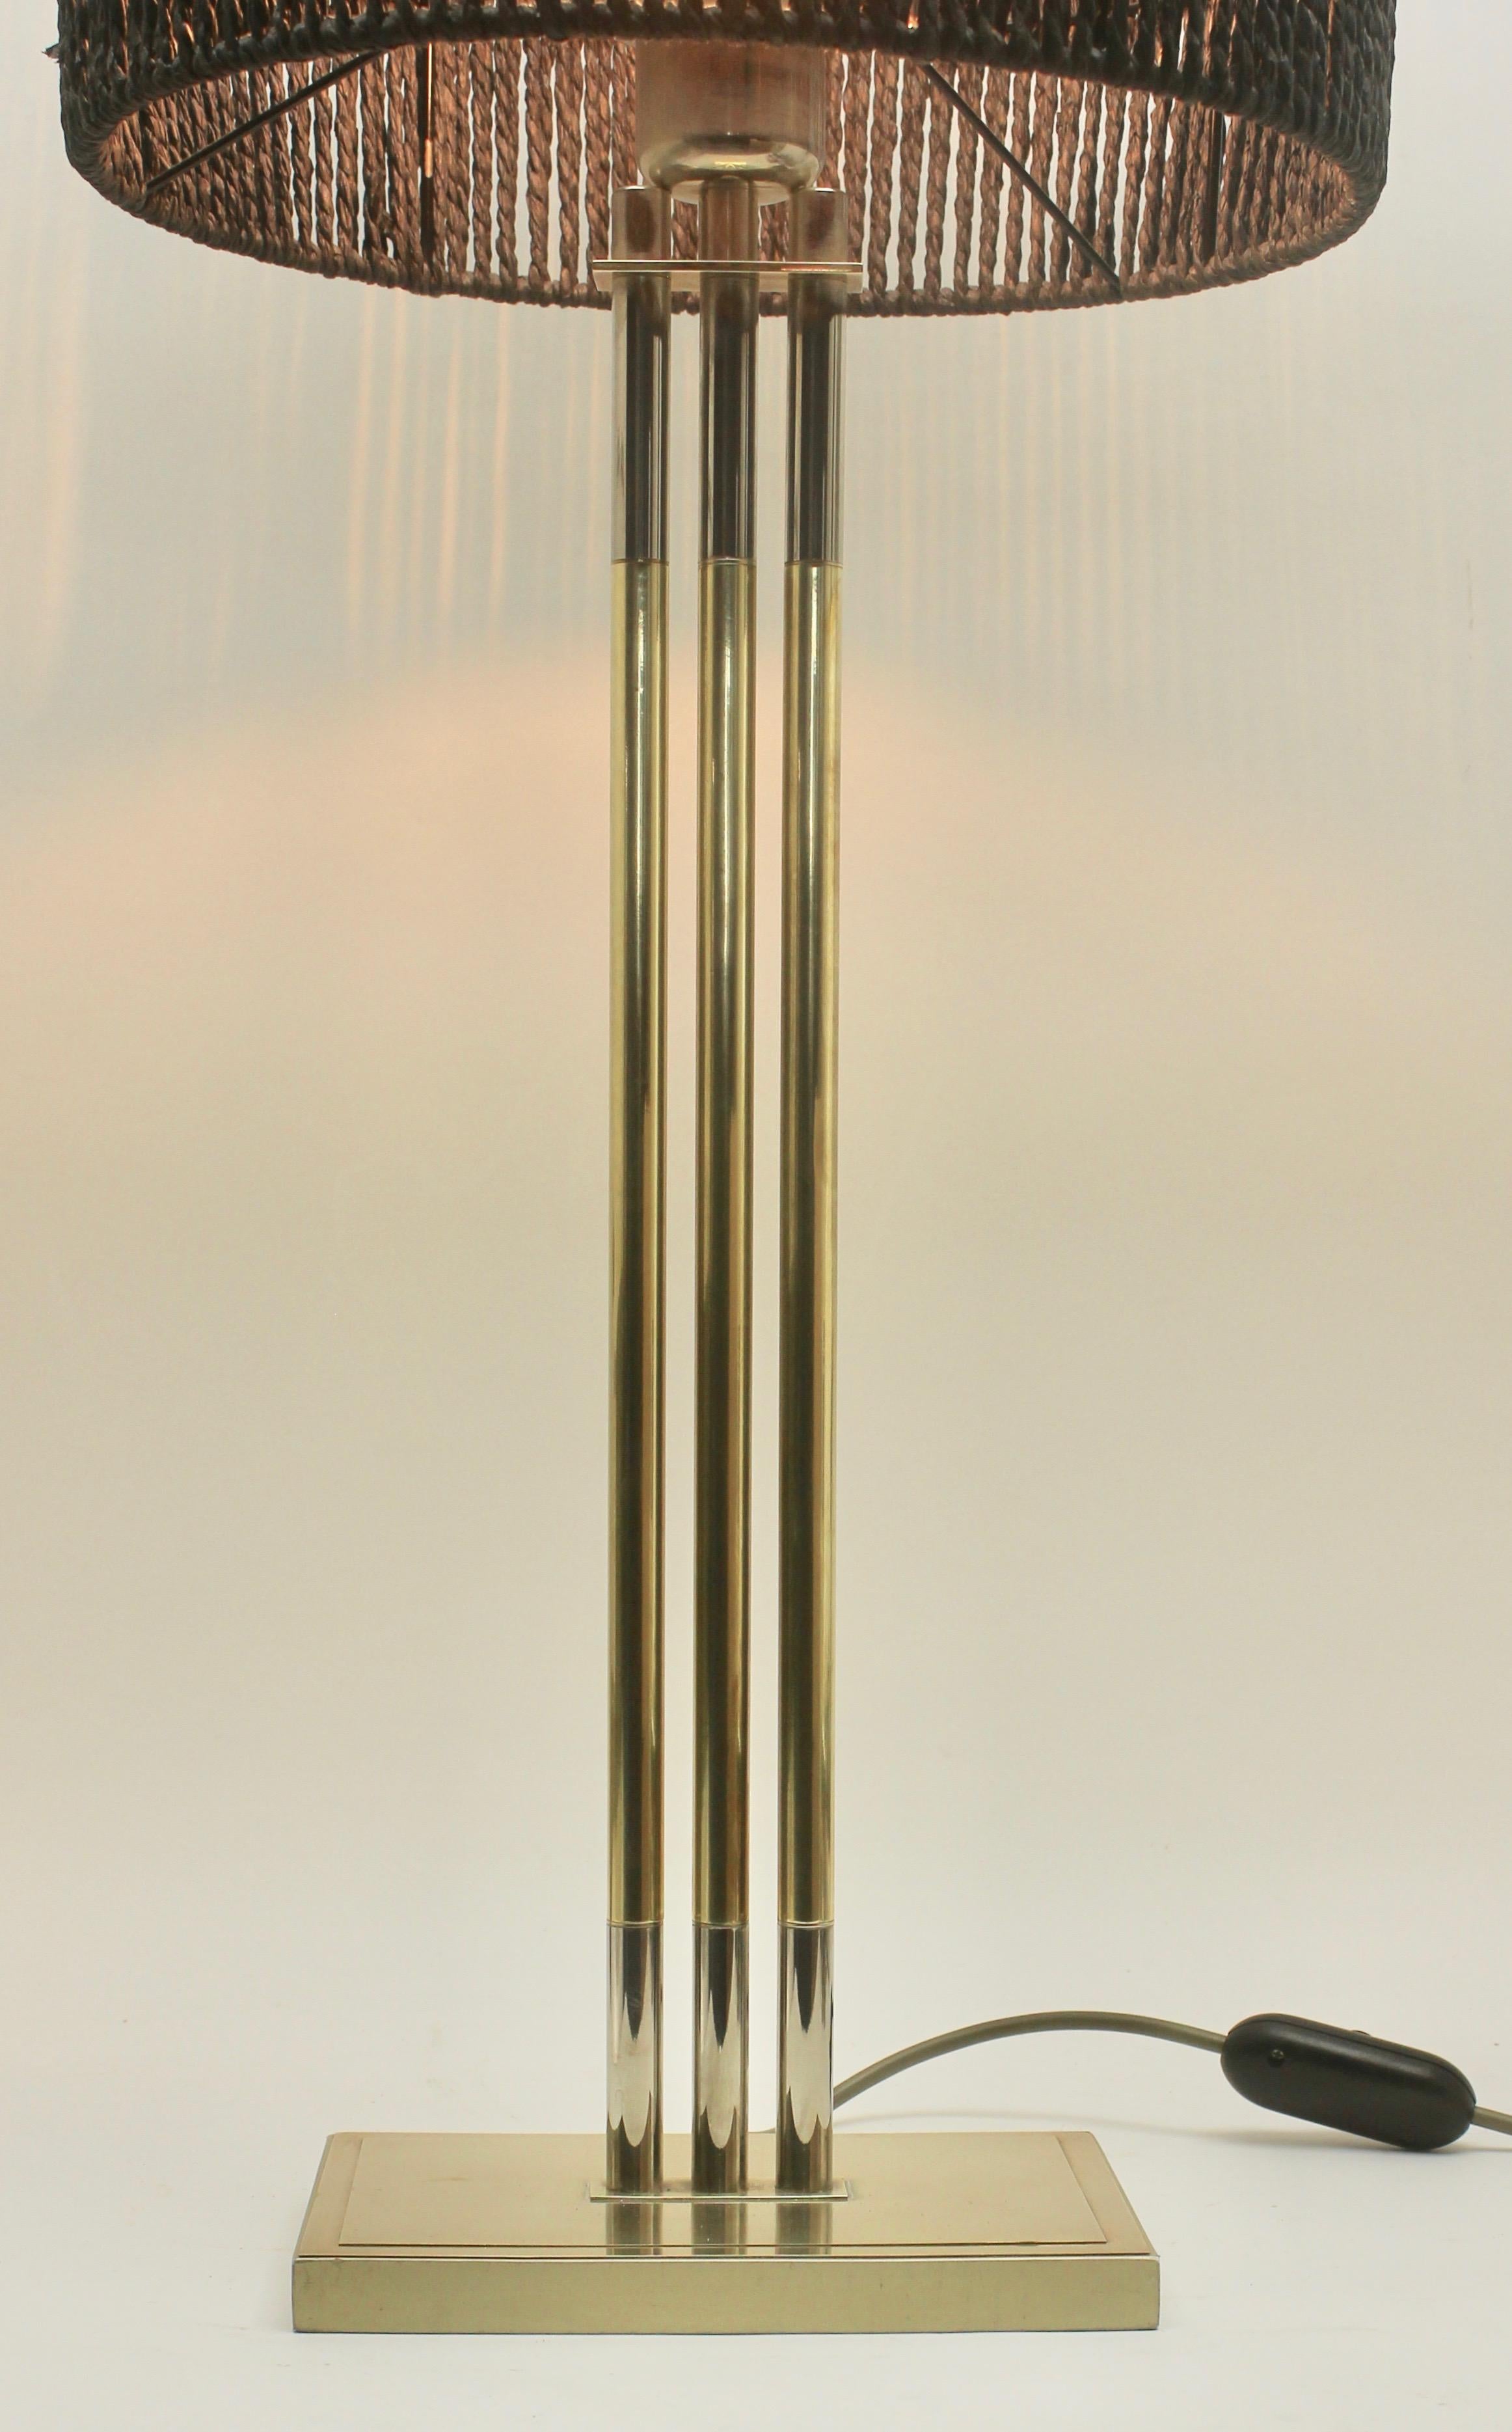 Machine-Made Vintage Brass Table Lamp by Willy Rizzo for De Knudt, 'Numbered 3784', 1970s